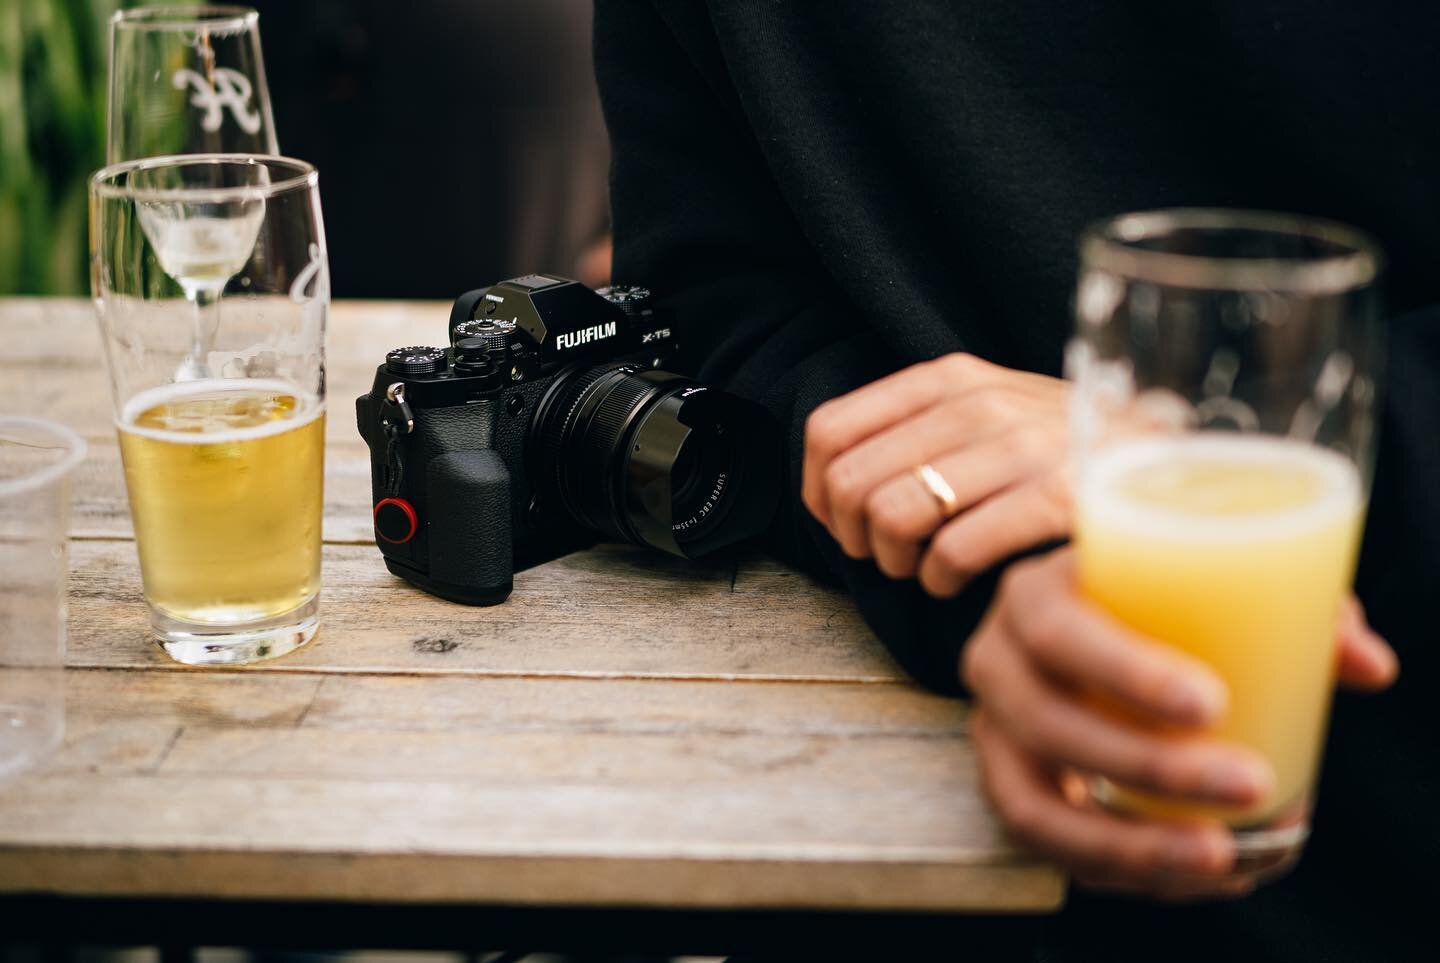 Ten horizontal snaps from Thursdays #beersandcameras pre-photowalk at @harlandbeer Bay Park. As always, so fun to hang out with San Diego photographers over some craft brews! 🍻 Seen for first time were the #FujiXt5 (2 of them) and the #mamiya645pro 